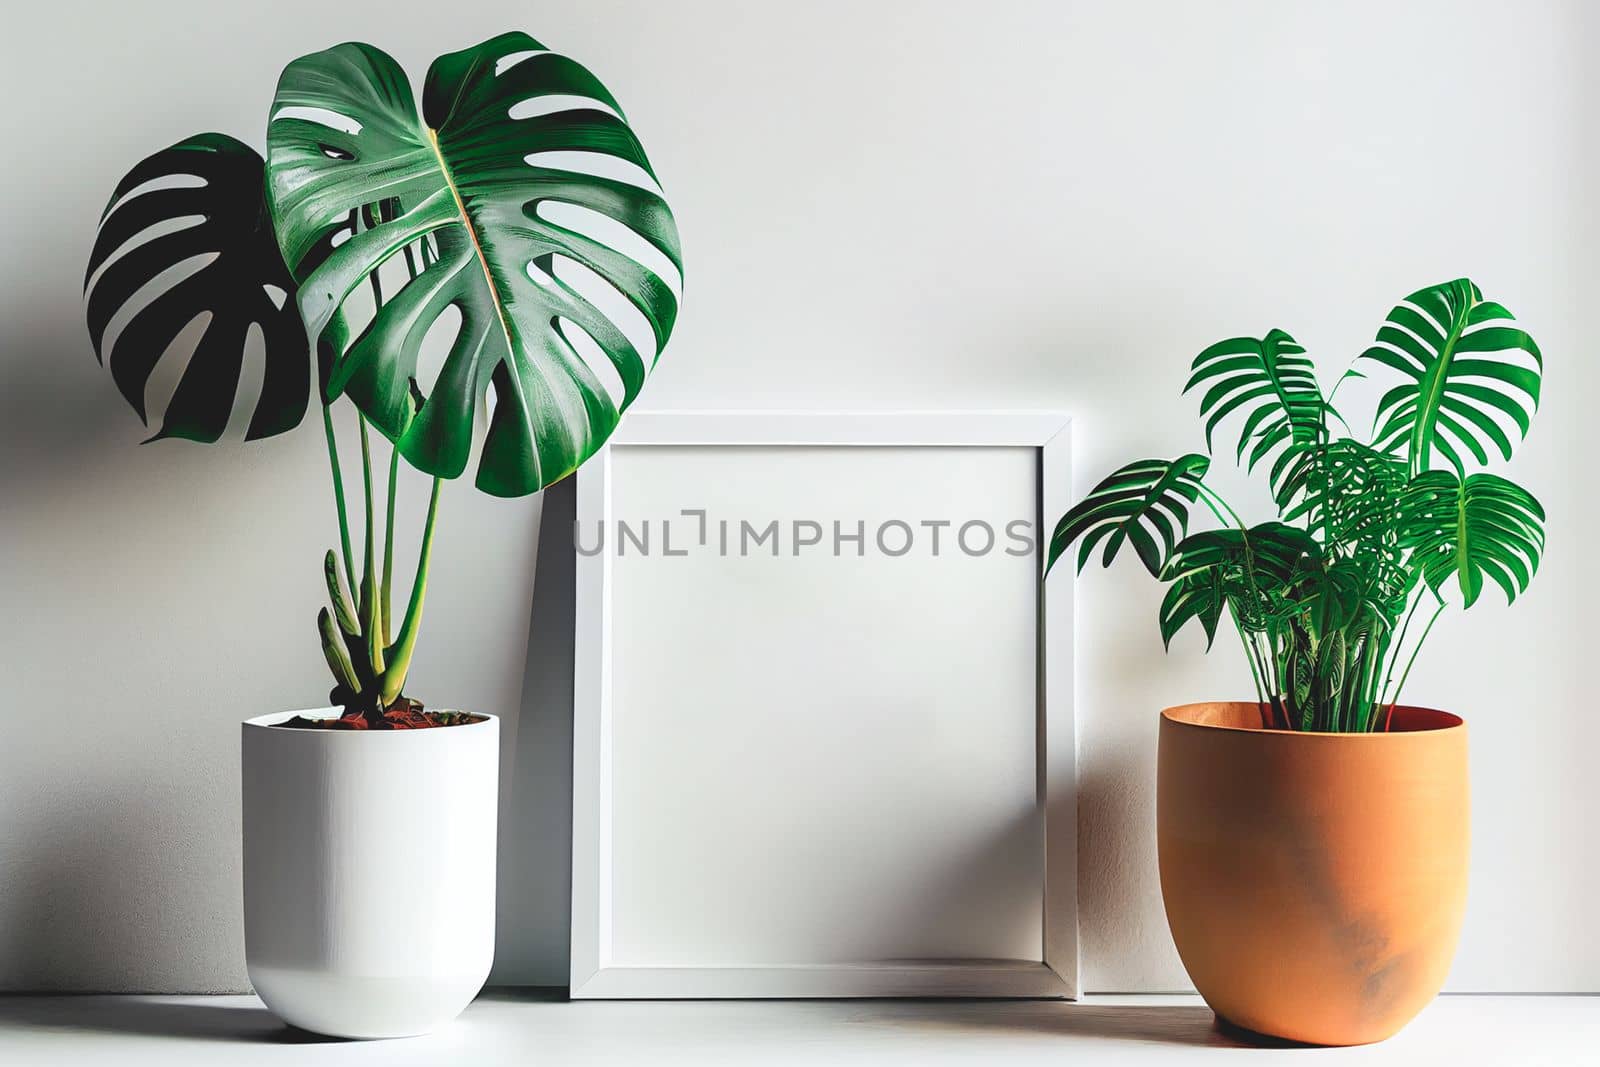 Mockup of empty frame displayed inside room interior with white wall background and monstera plant pot nearby. 3D Rendering